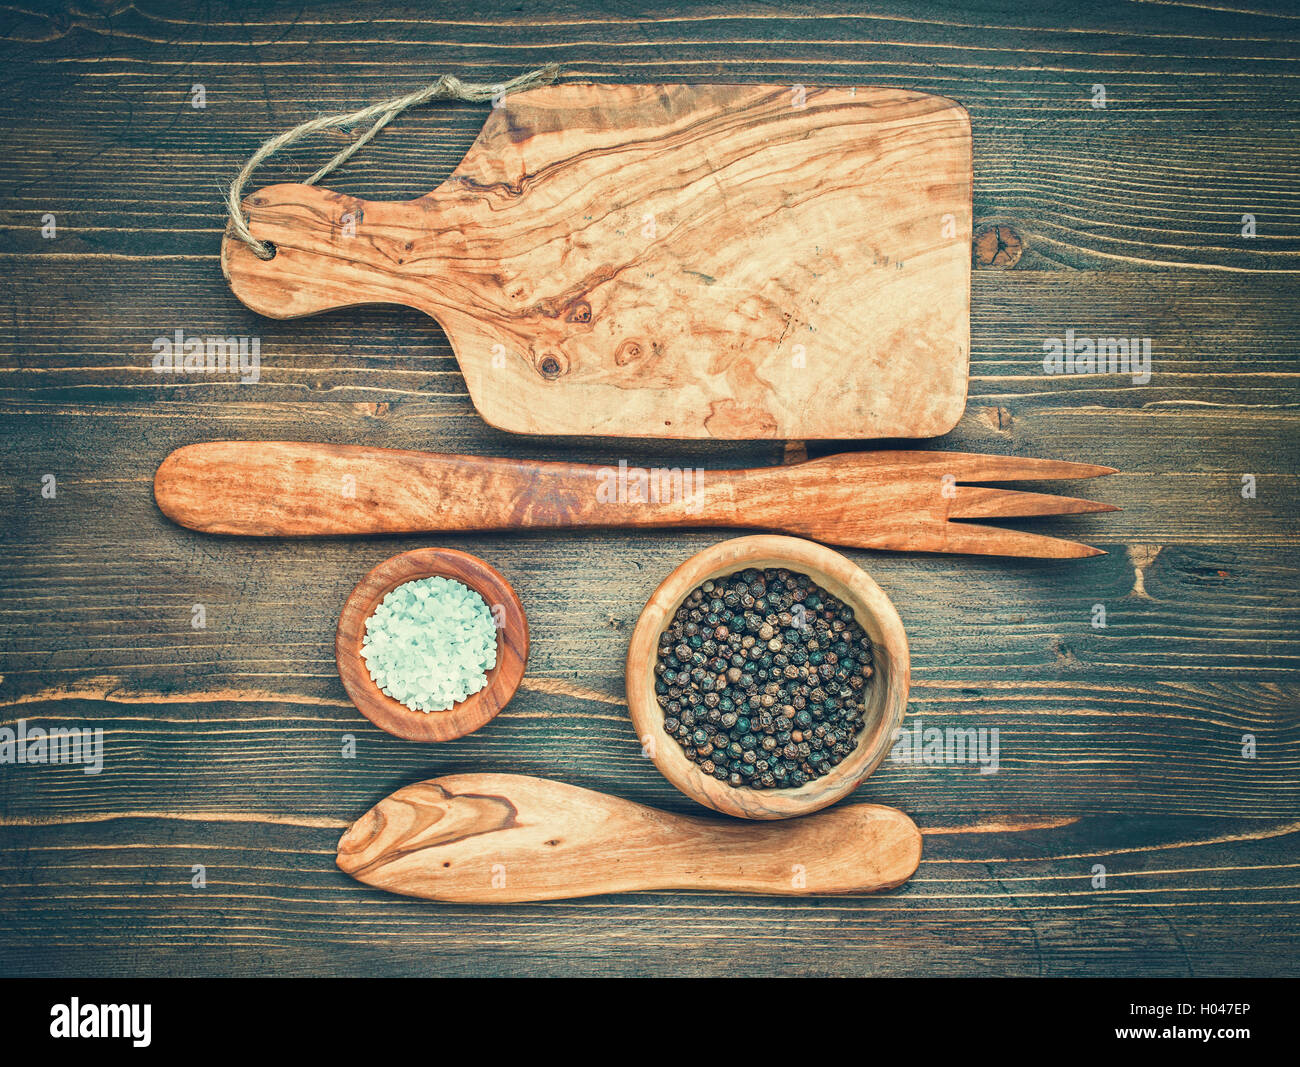 Wooden kitchenware top view Stock Photo